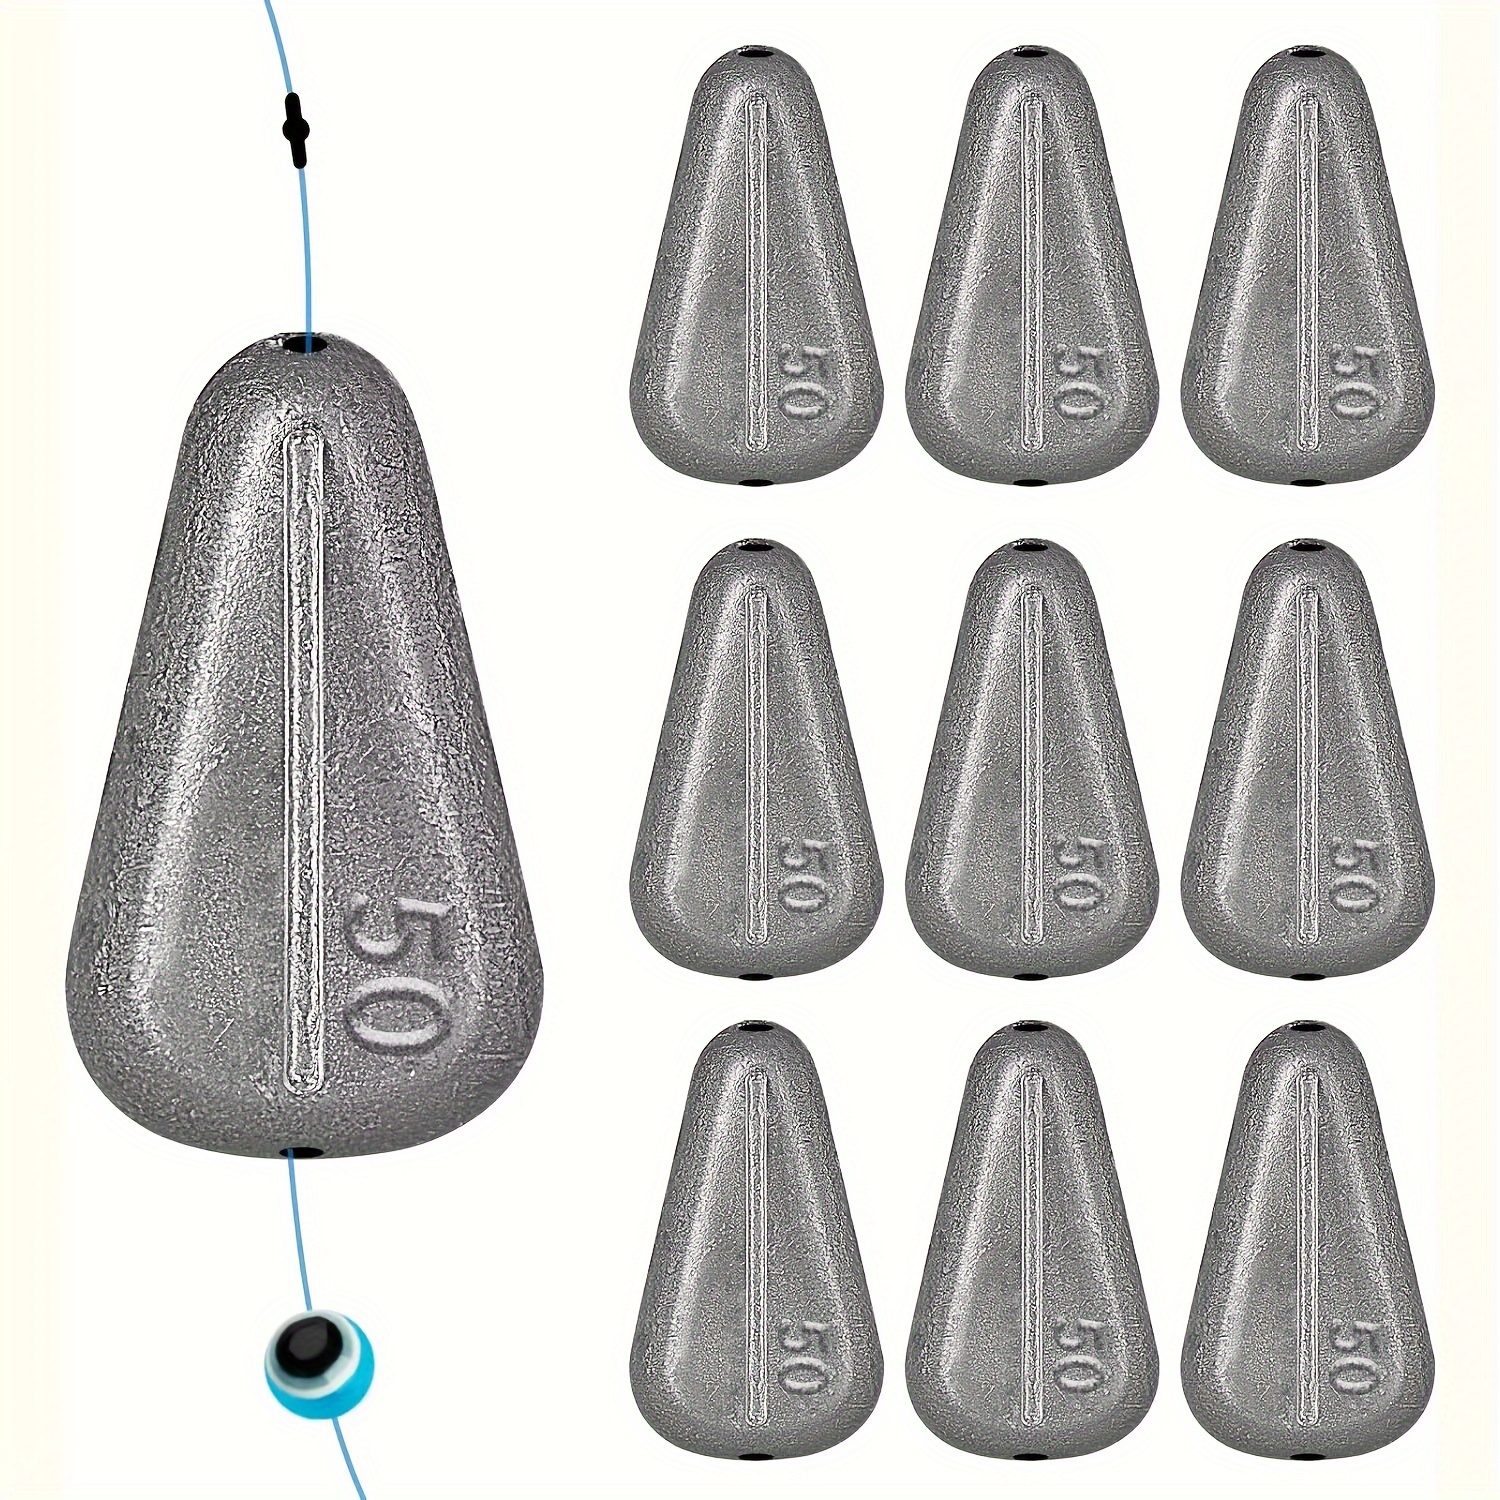  Goture Tungsten Nail Weights 10Pcs,Neko Rig Wacky Rig Fishing  Weights for Soft Plastic Lures 1/16Oz Nail Sinker Weights for Bass Fishing  : Sports & Outdoors